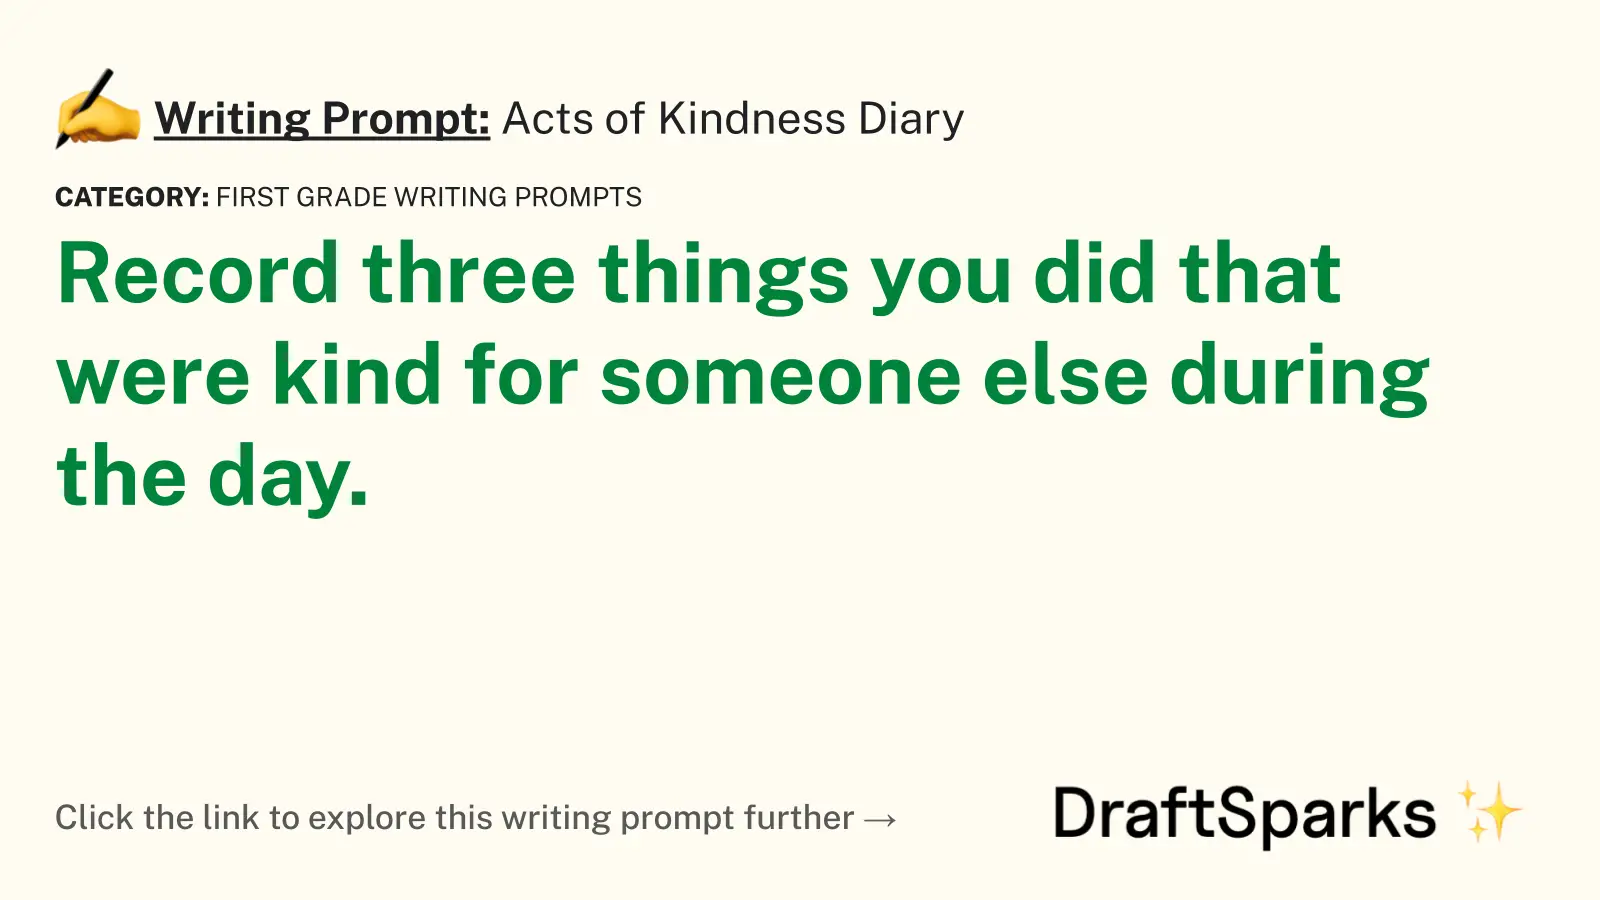 Acts of Kindness Diary